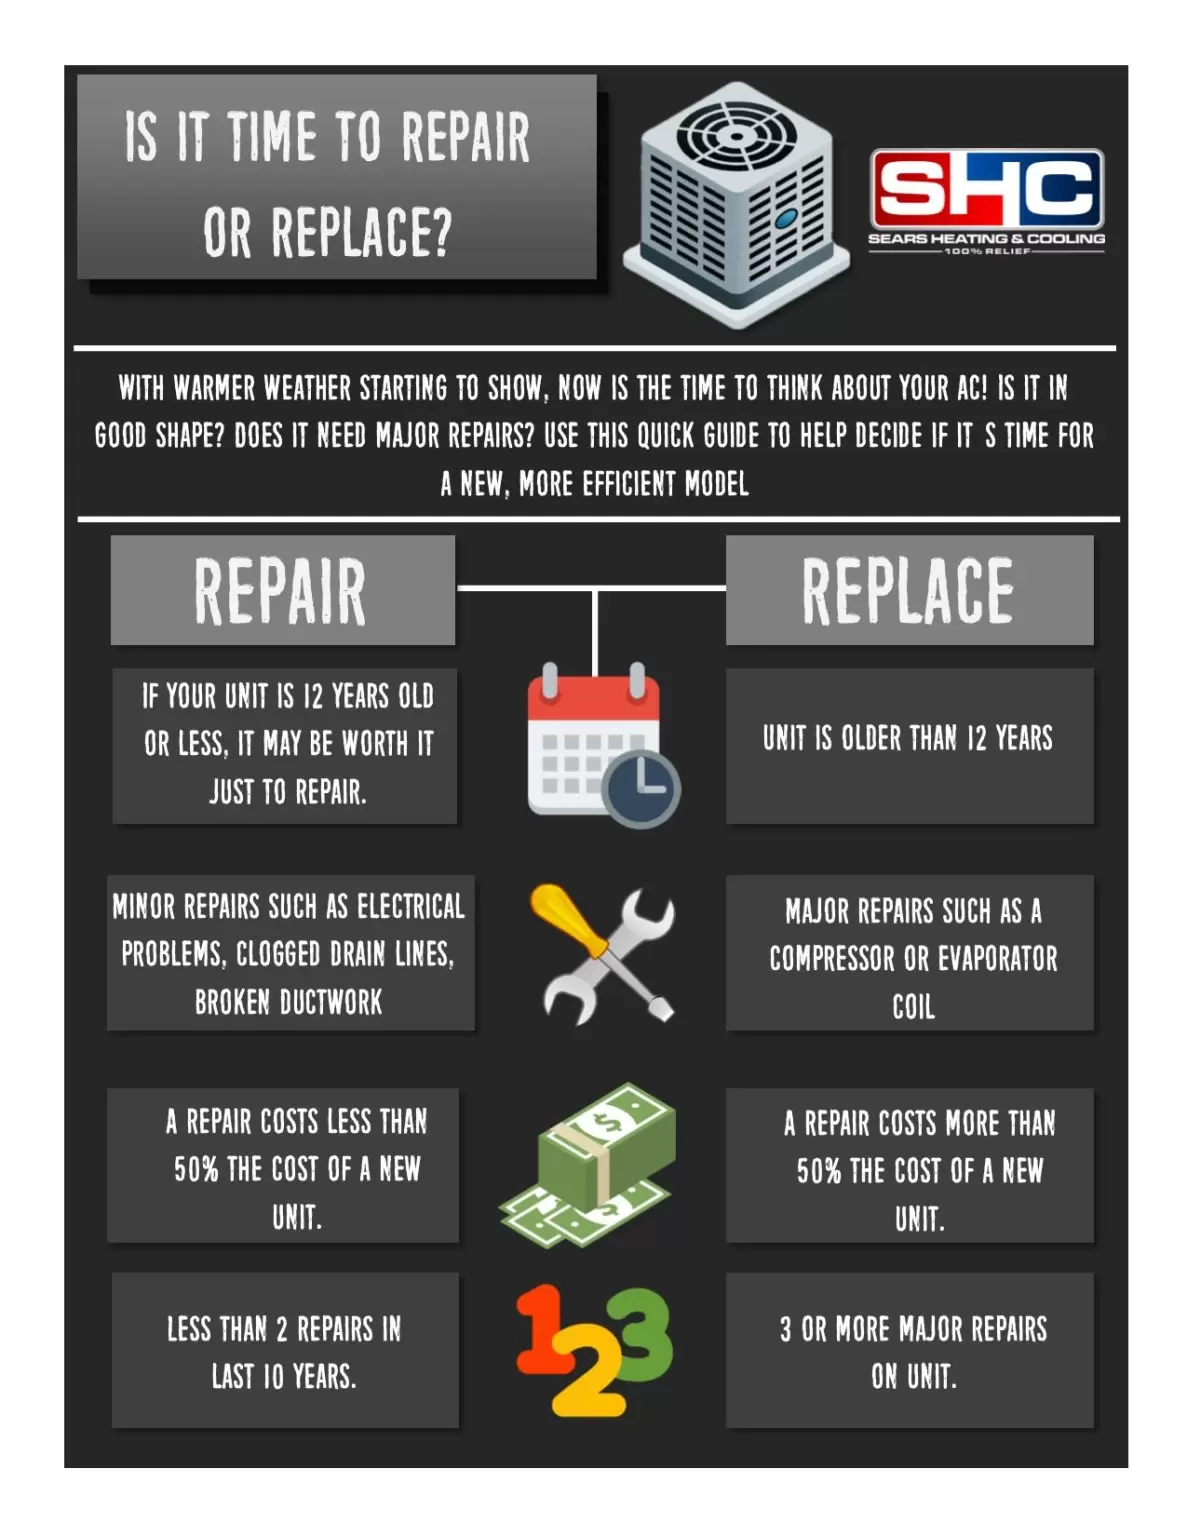 ac repair or replace infographic